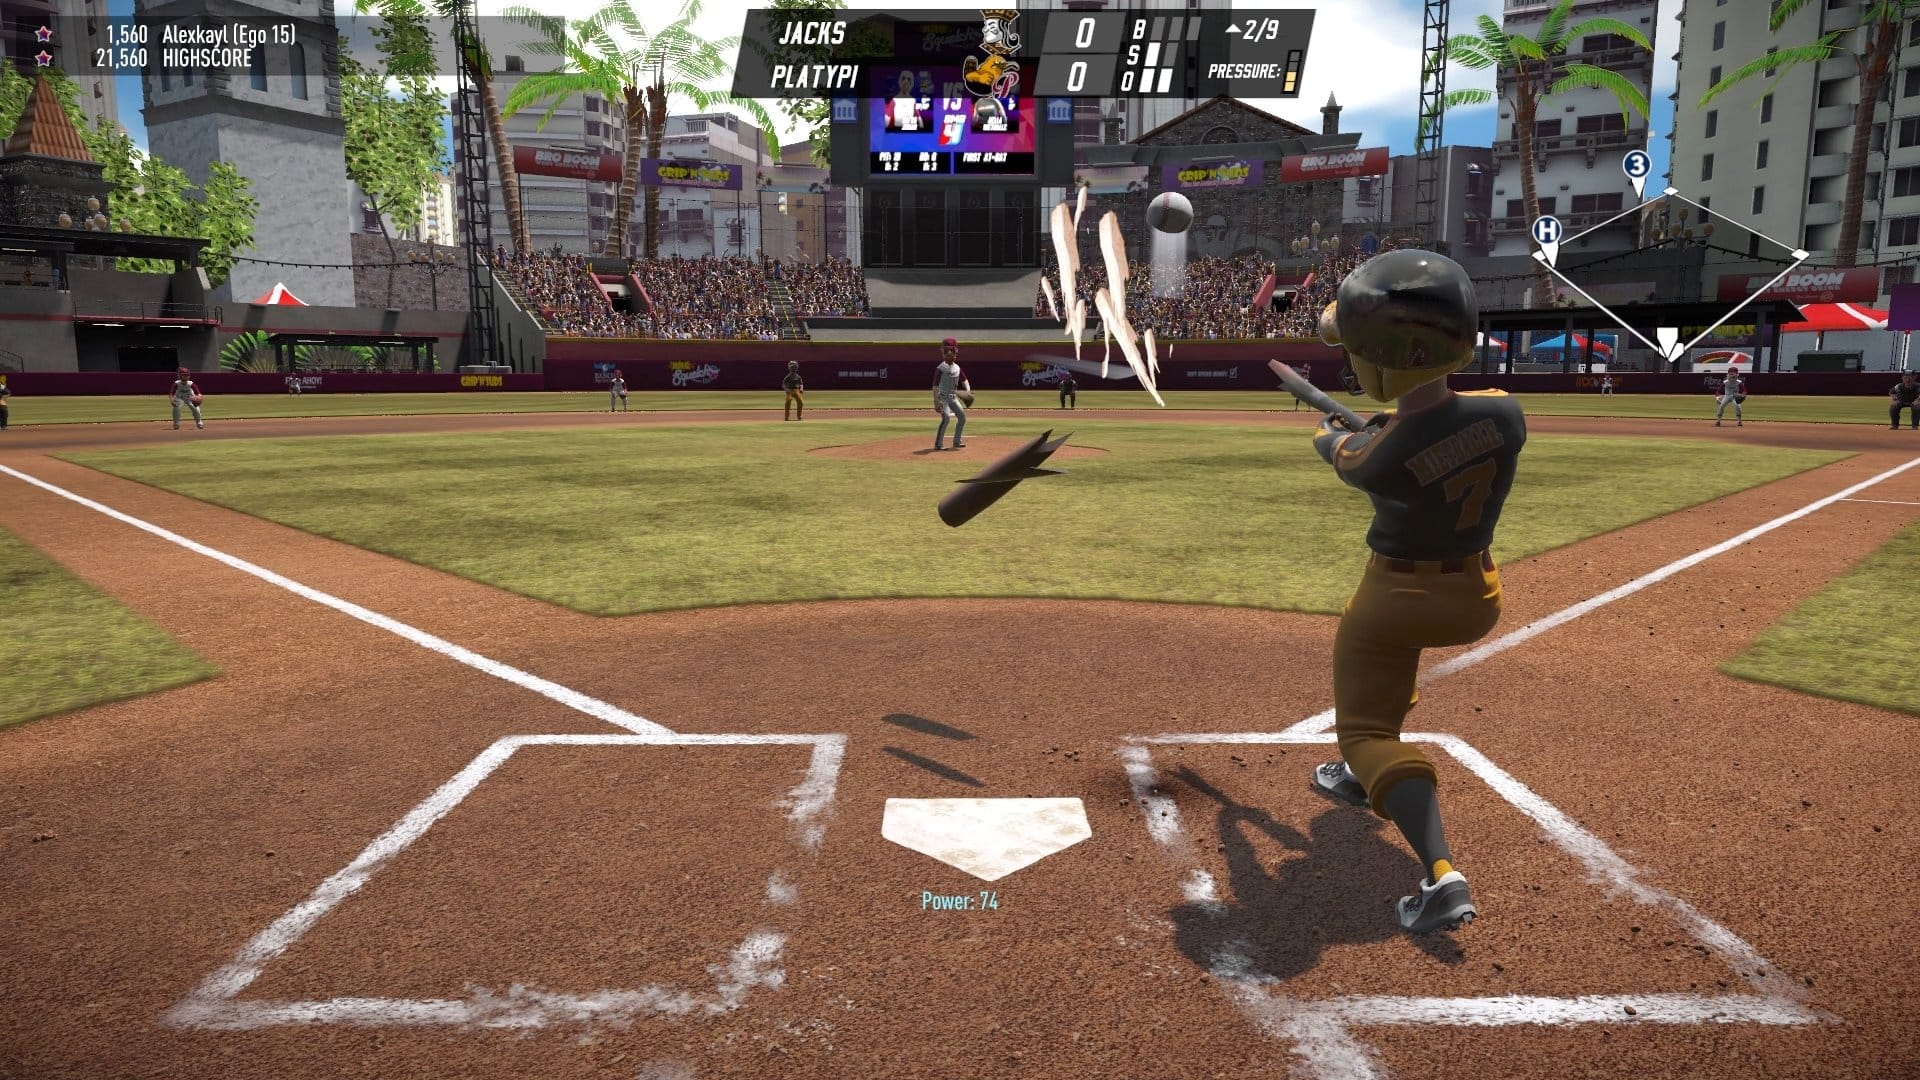 Super Mega Baseball 4 Review: Gameplay Videos, Features, Modes and